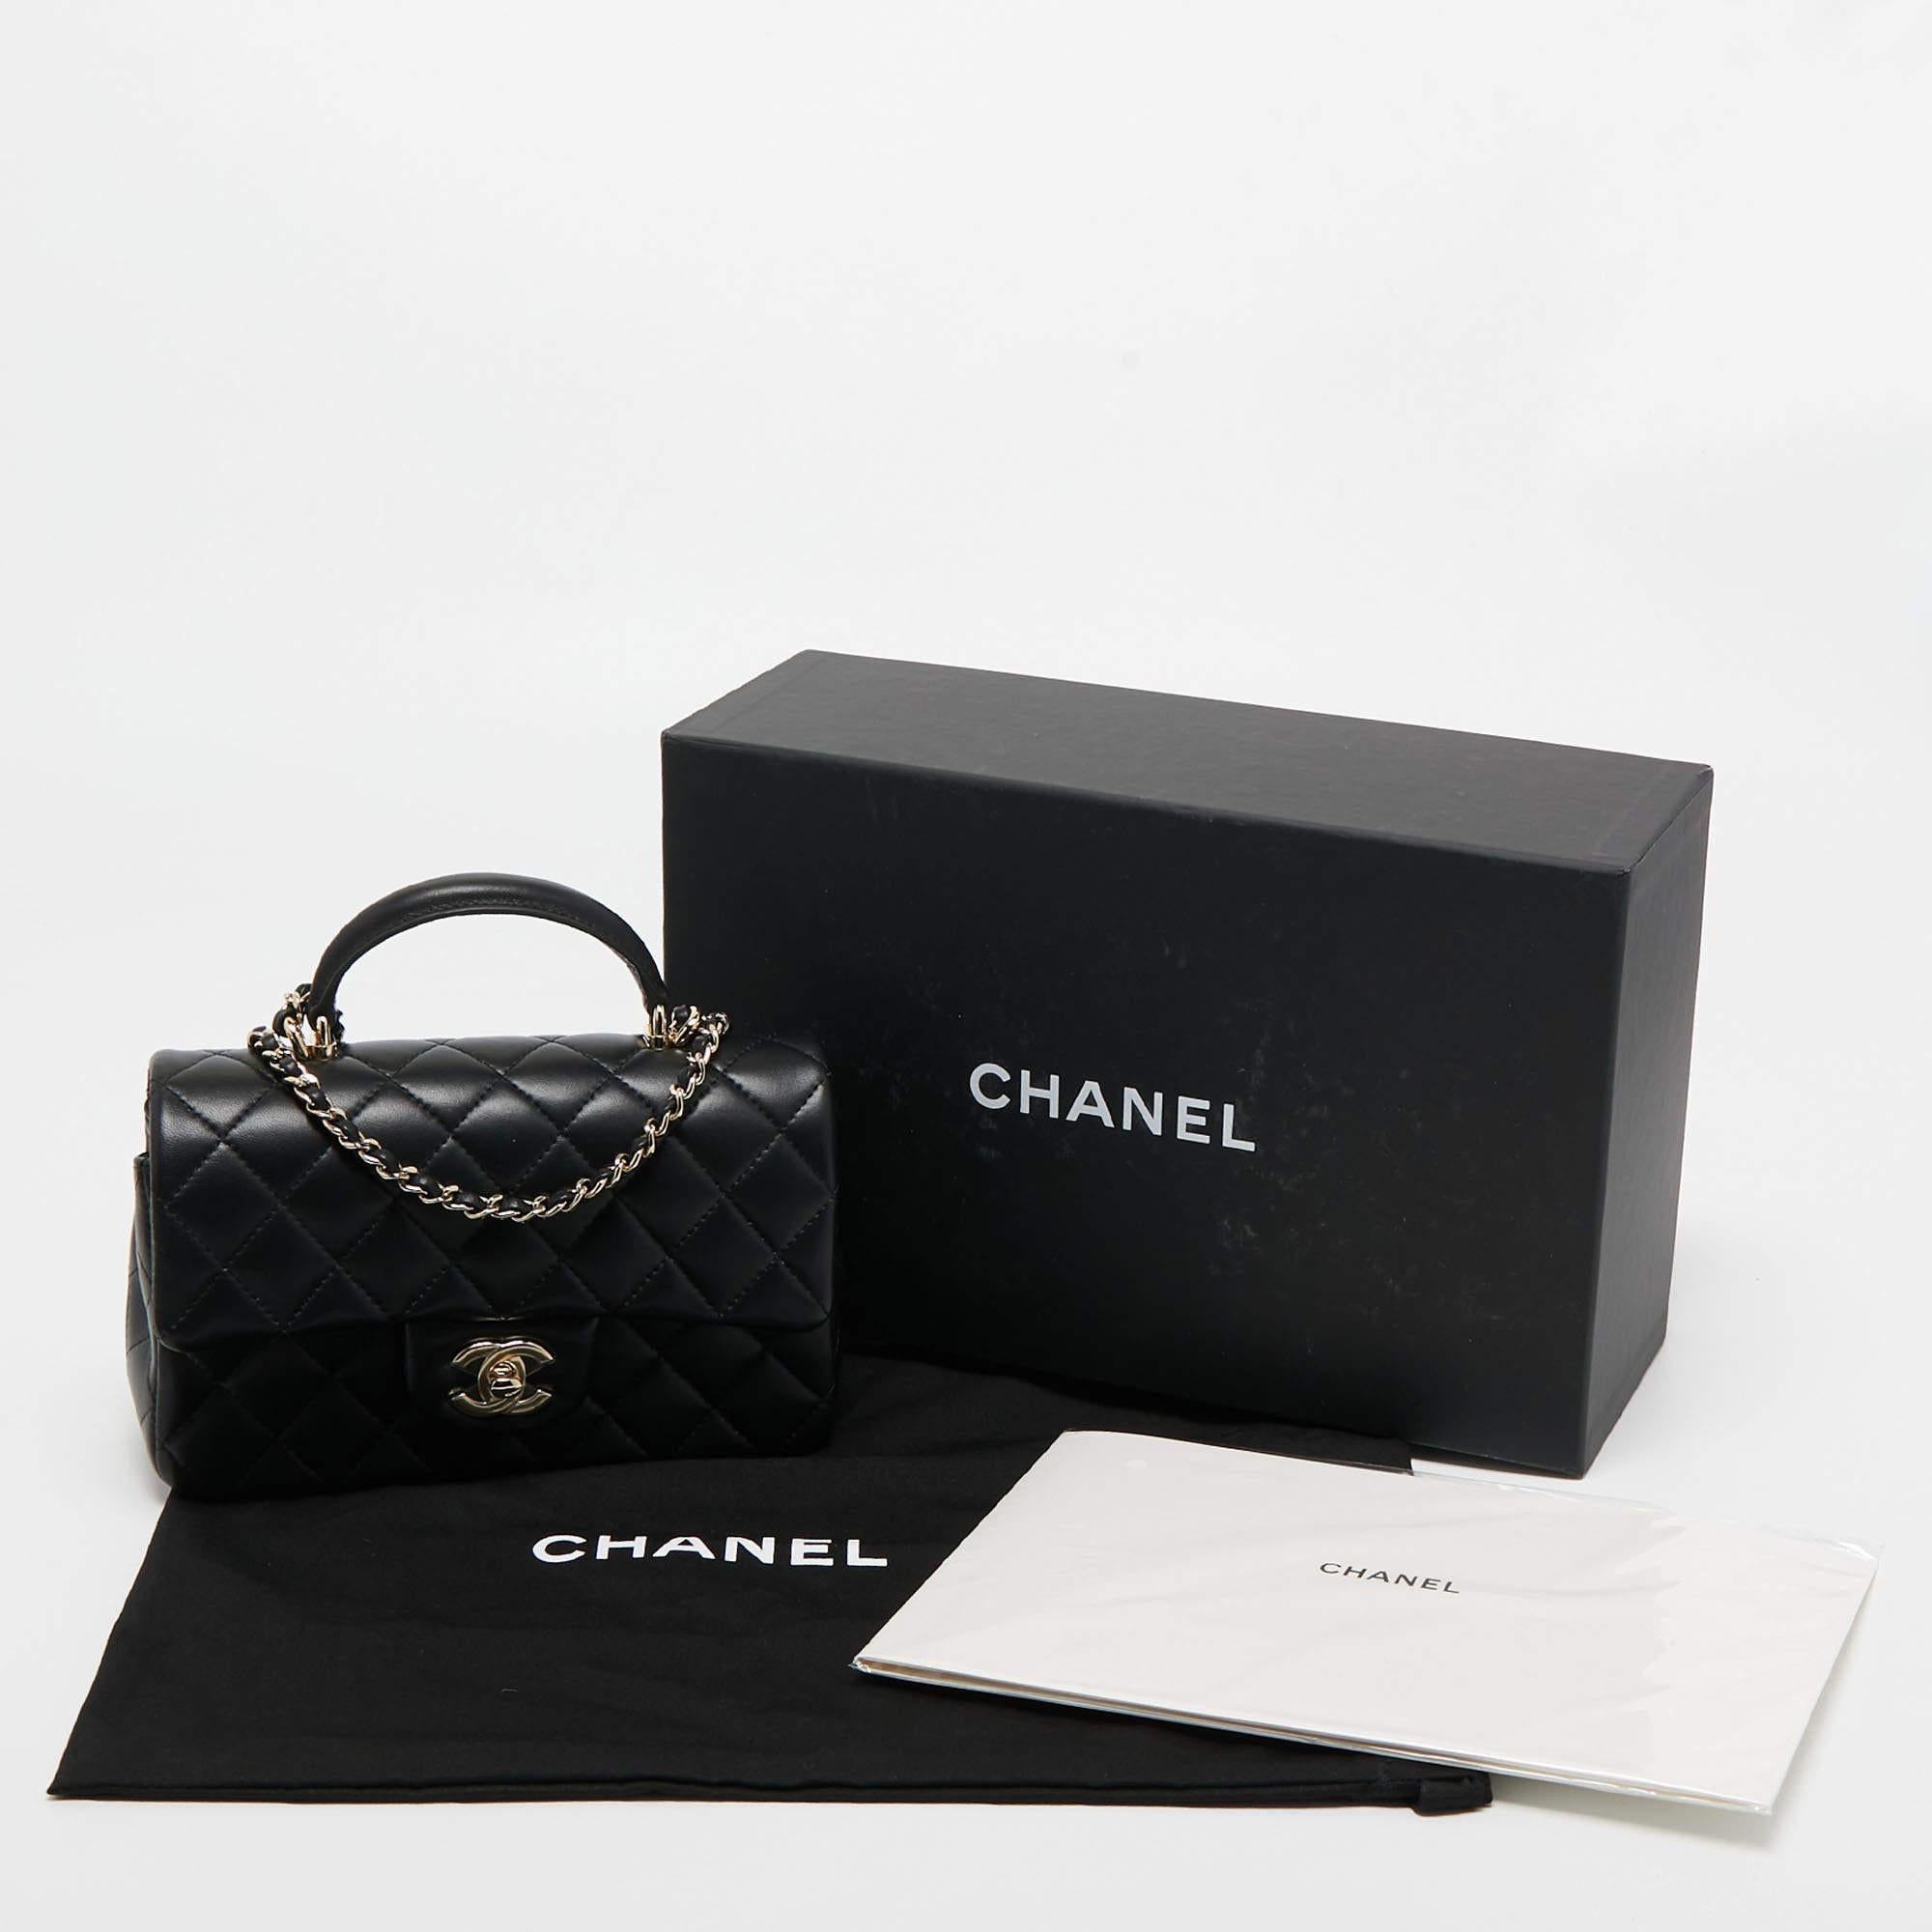 Chanel Black Quilted Leather Mini Rectangular Top Handle Bag 8